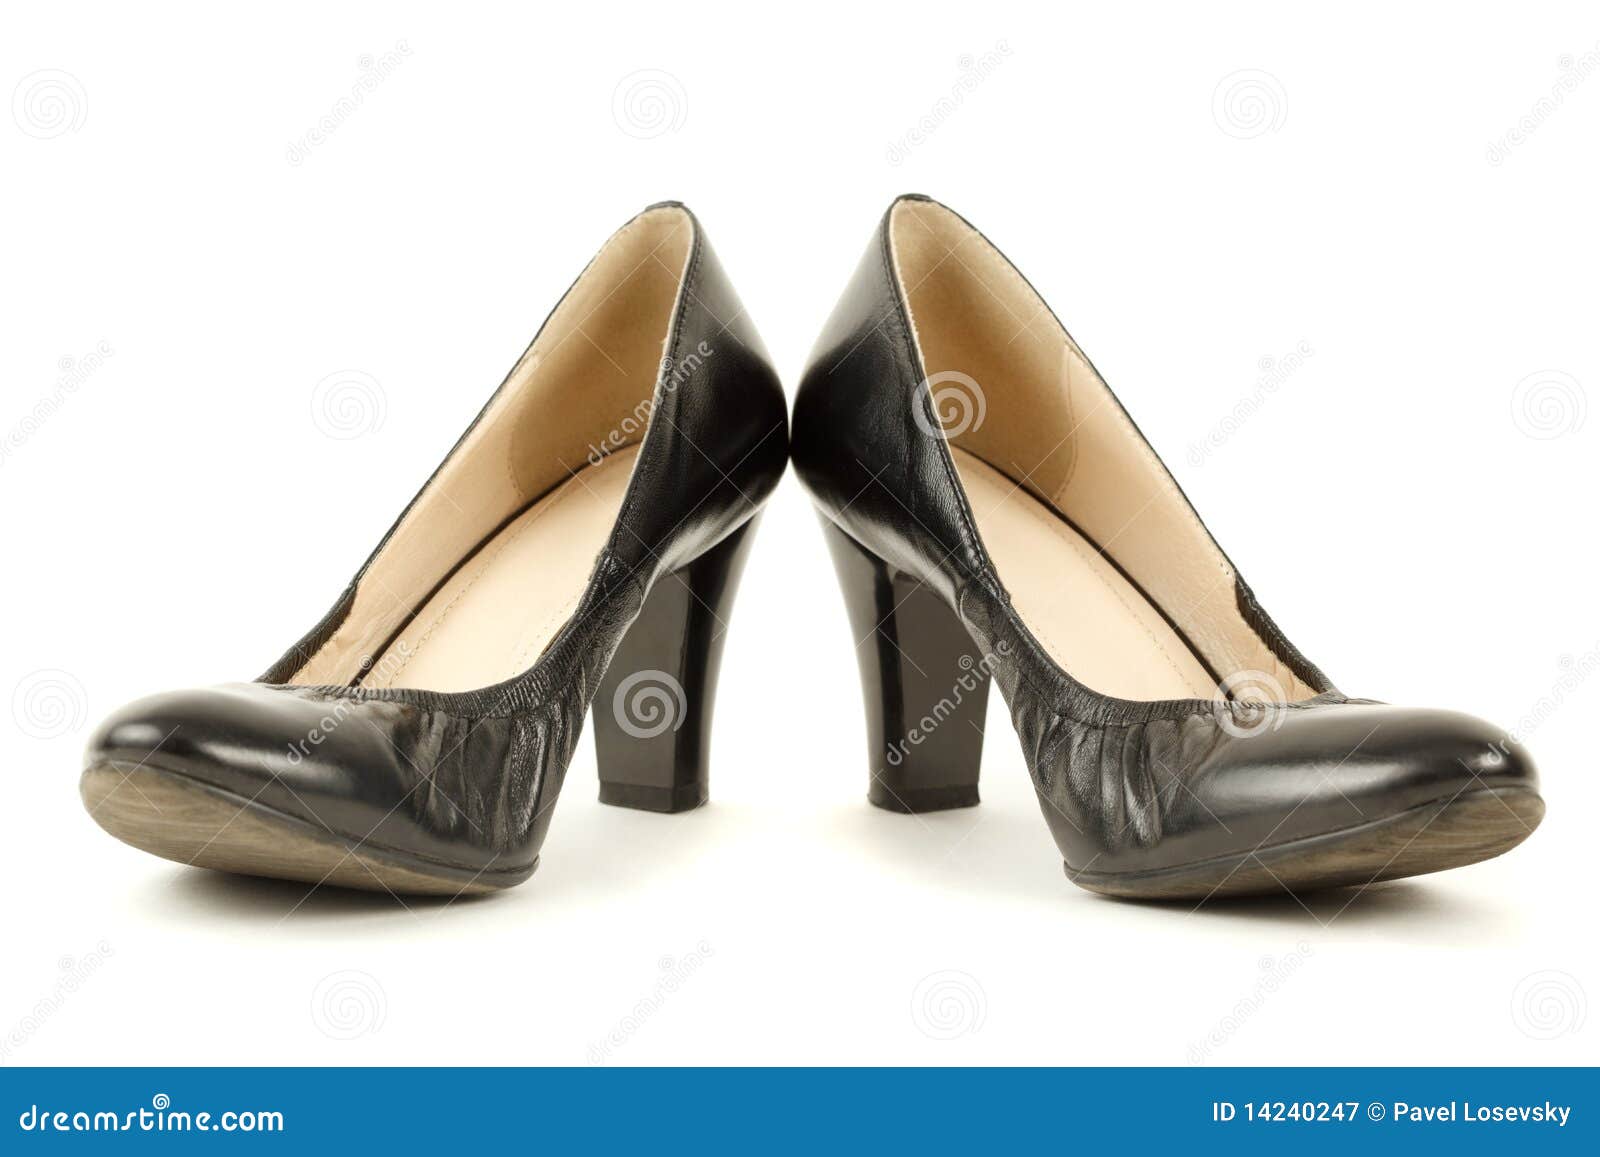 Pair Of Black Women's High Heels Royalty Free Stock Photography - Image ...